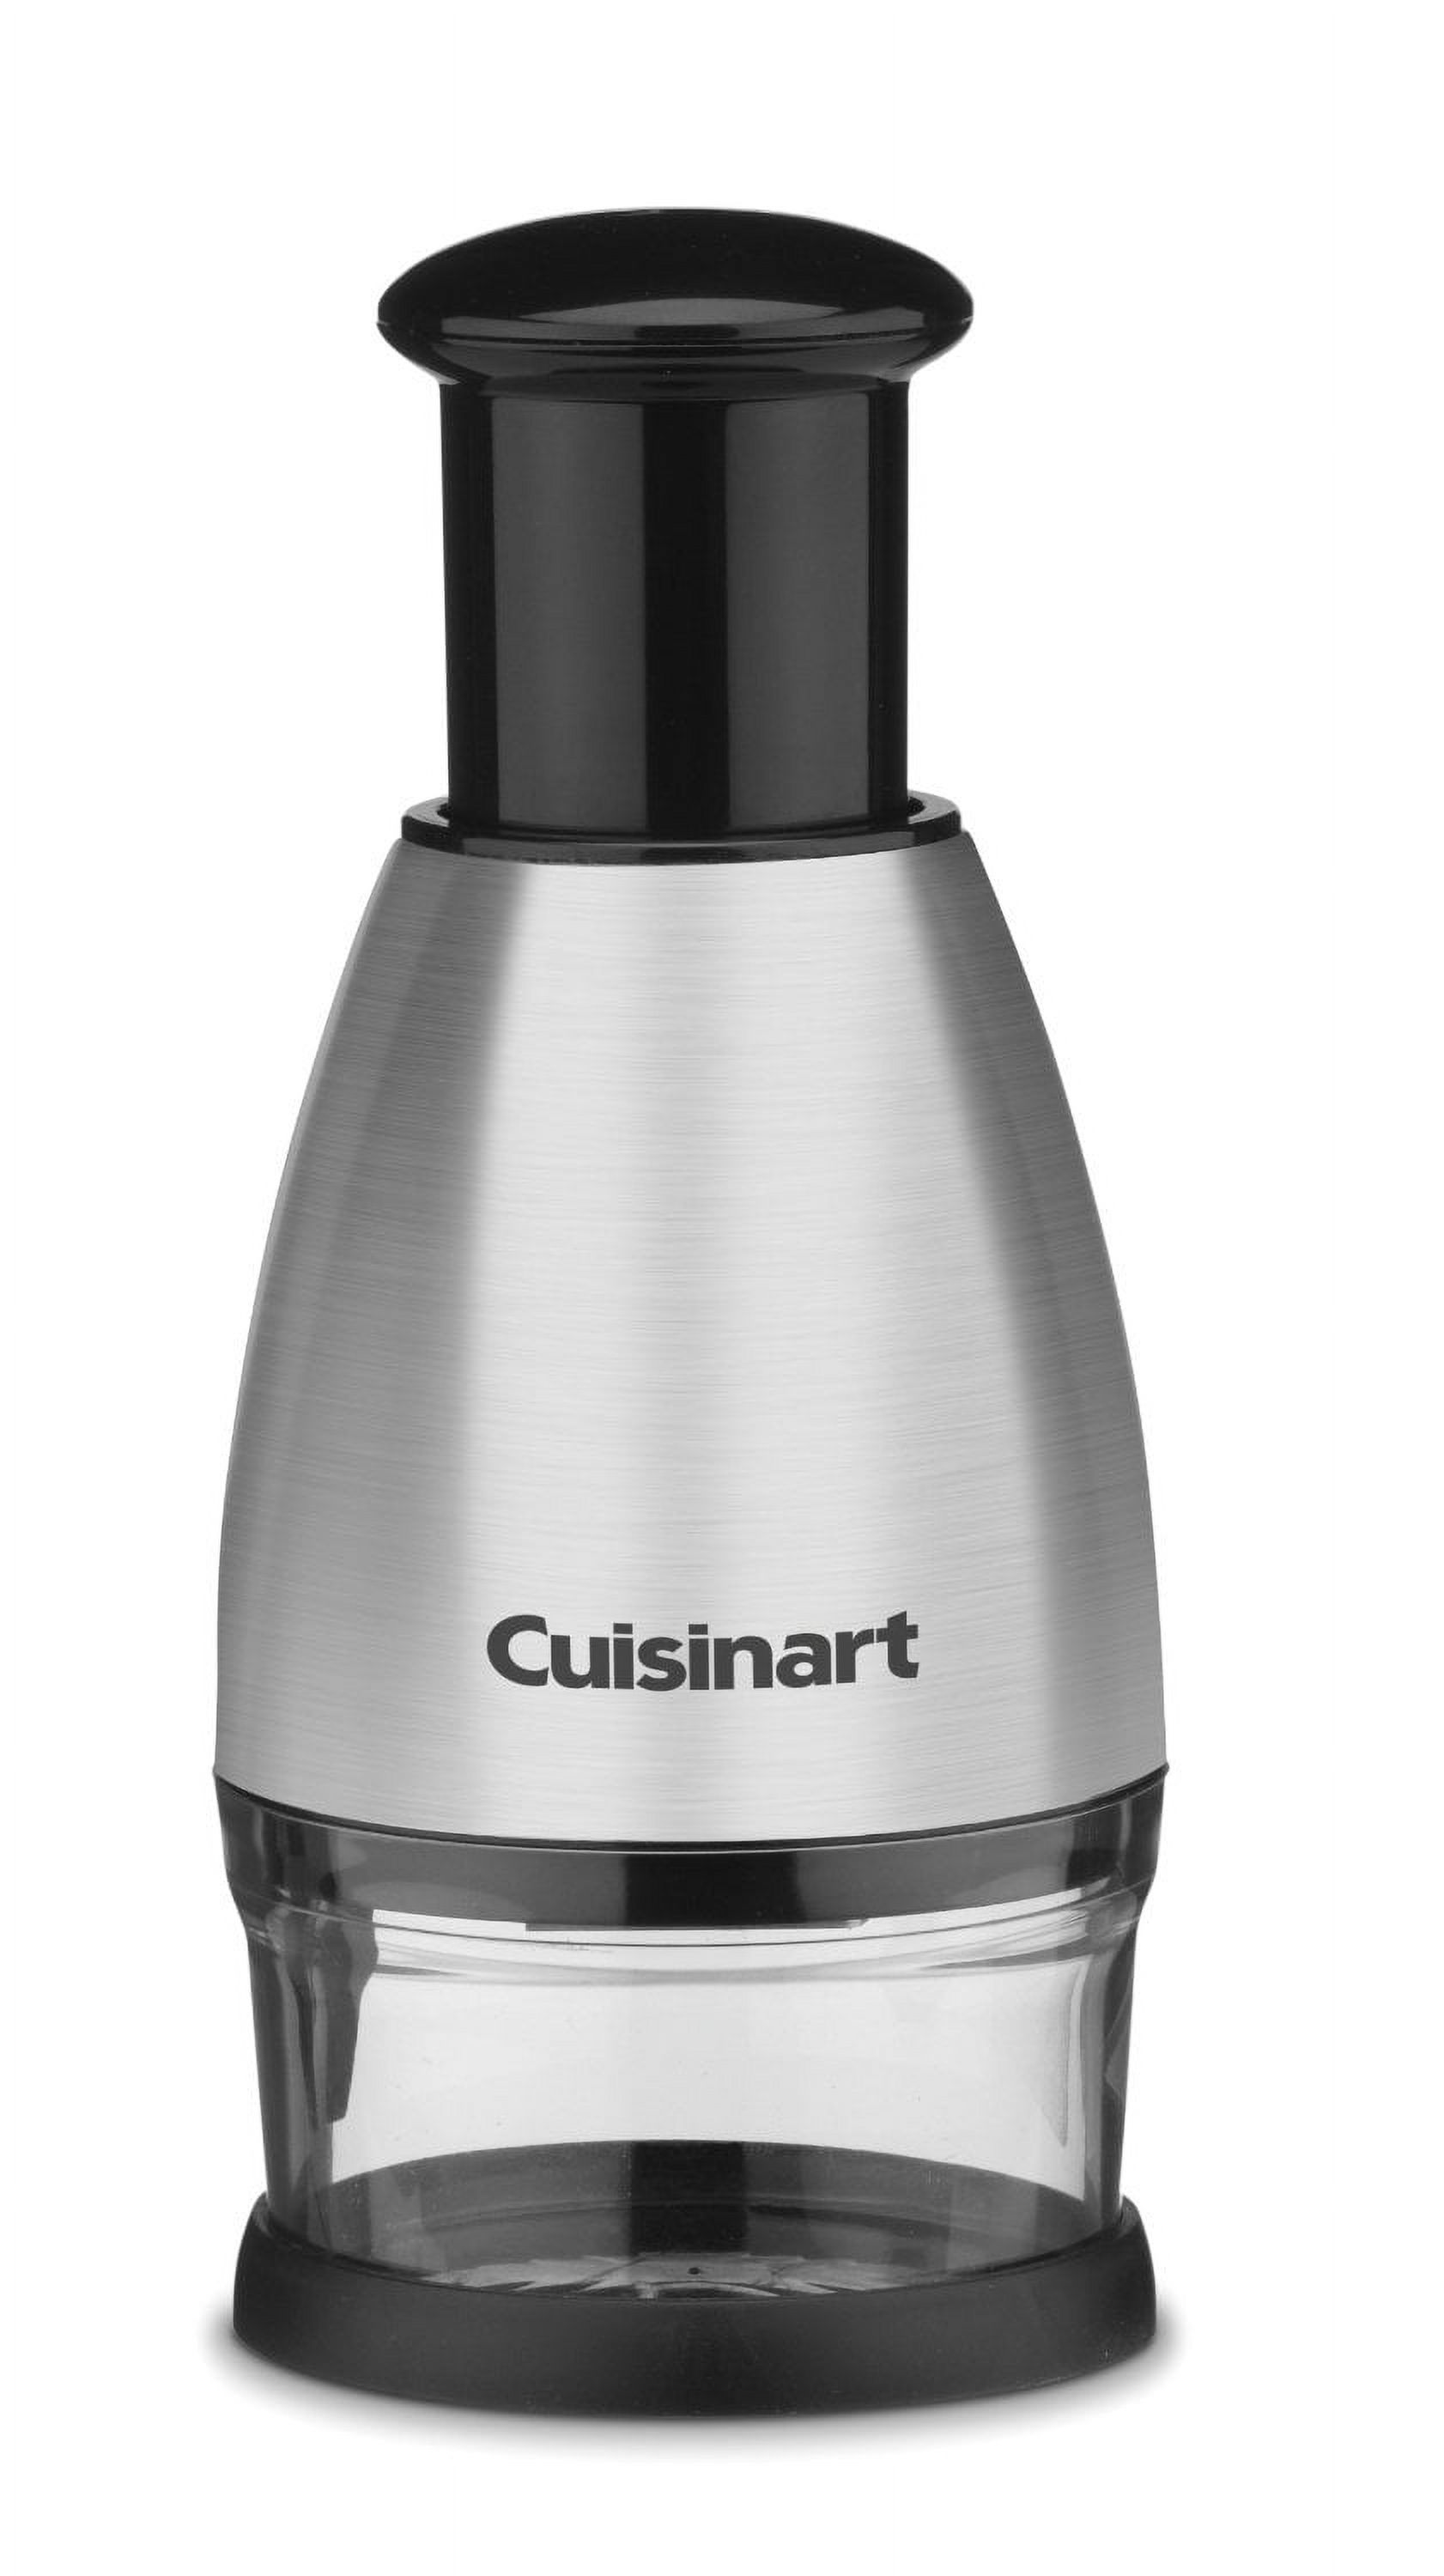 Cuisinart CTG-00-SCHP Stainless Steel Chopper - image 1 of 6